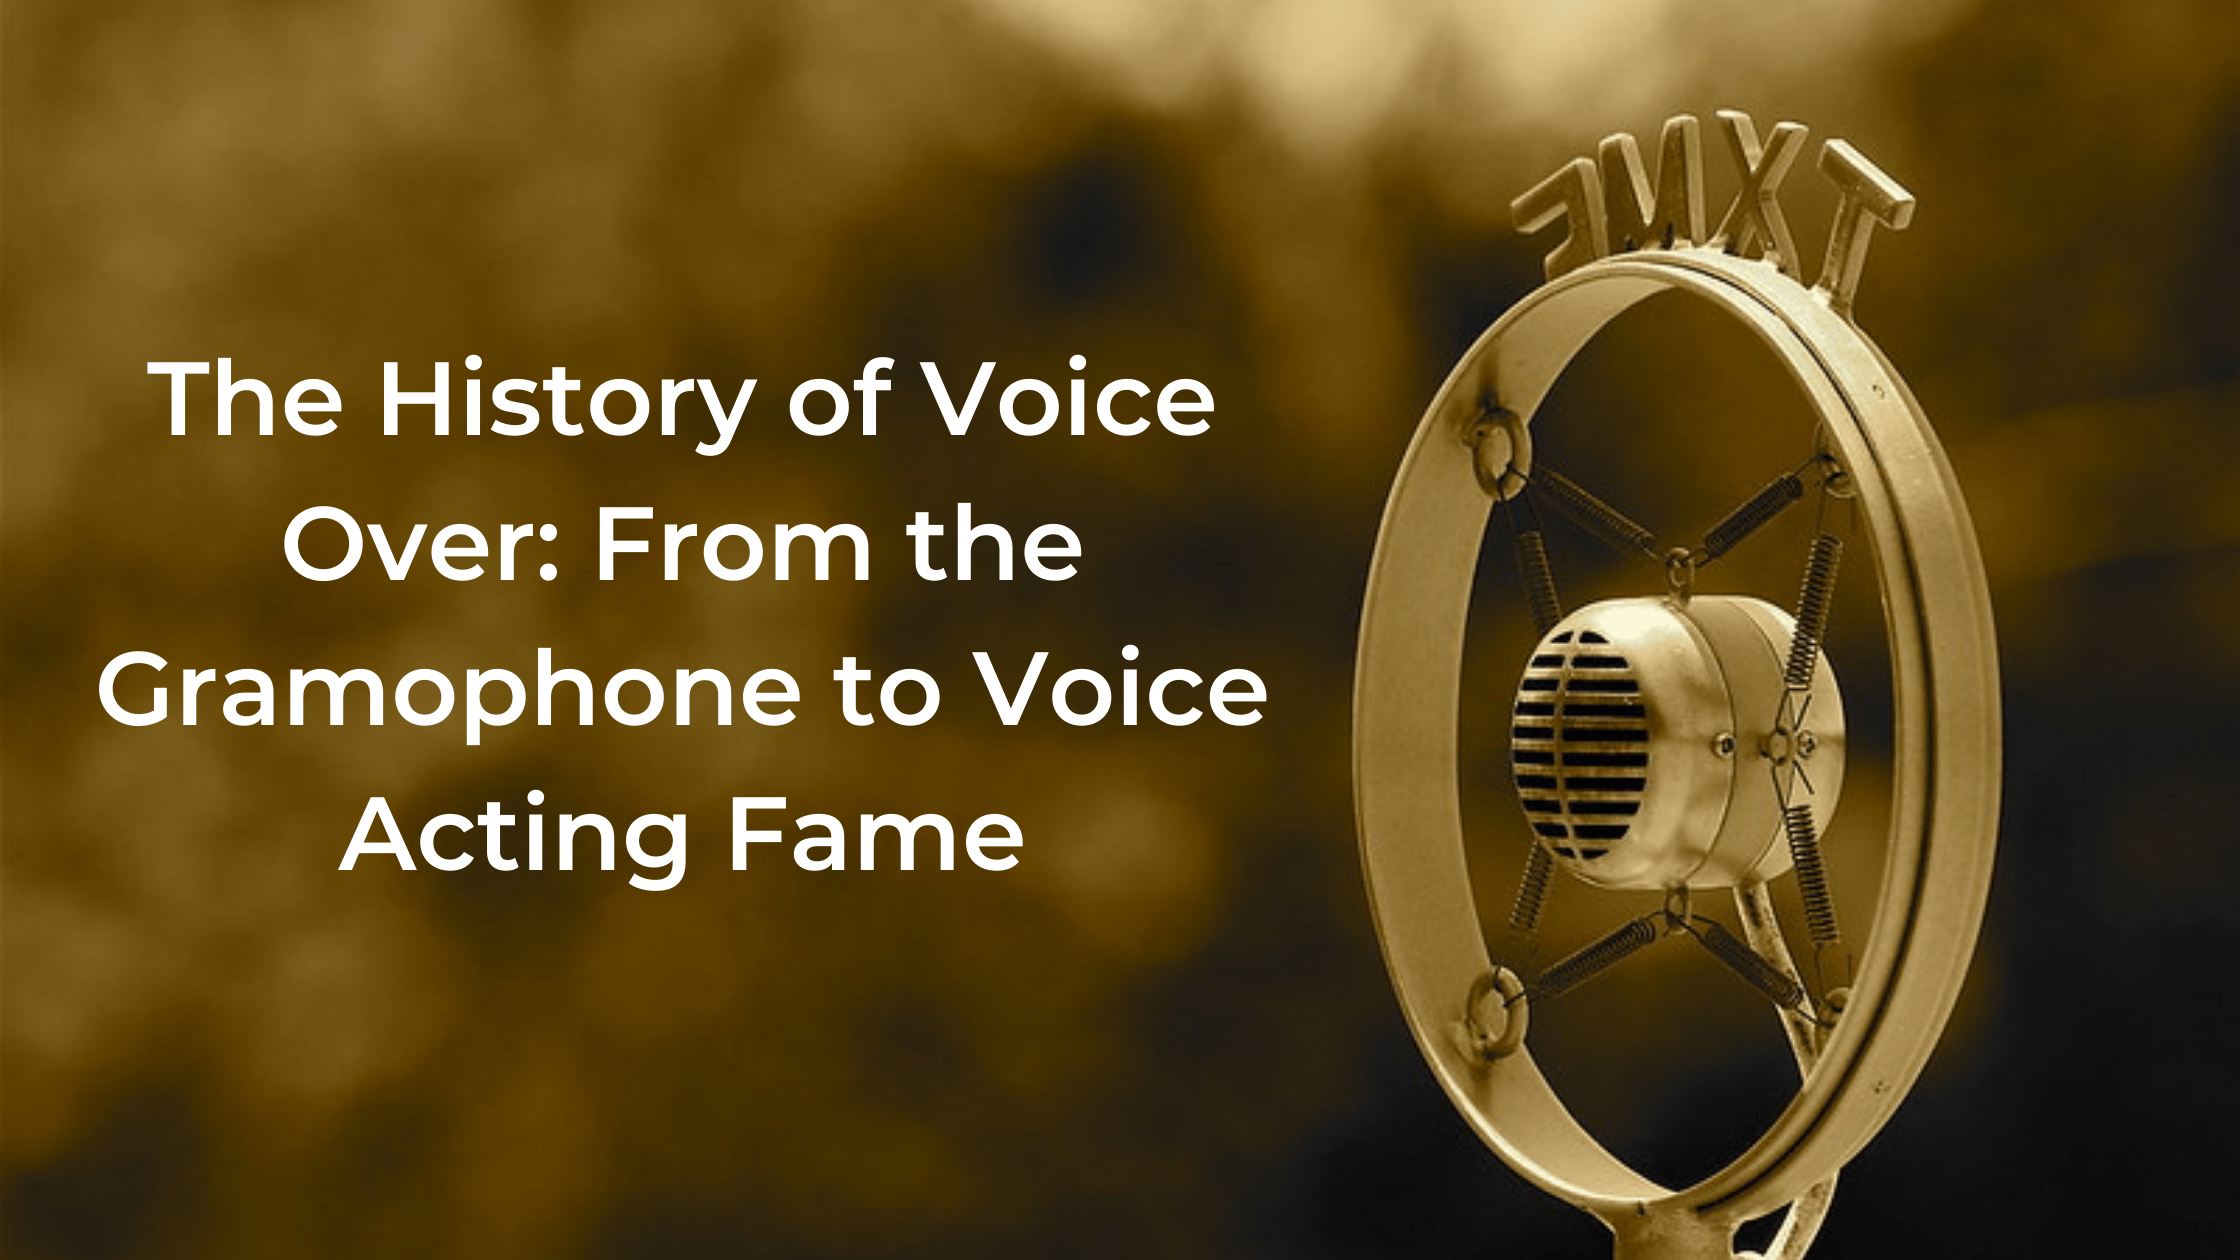 The History of Voice Over: From the Gramophone to Voice Acting Fame